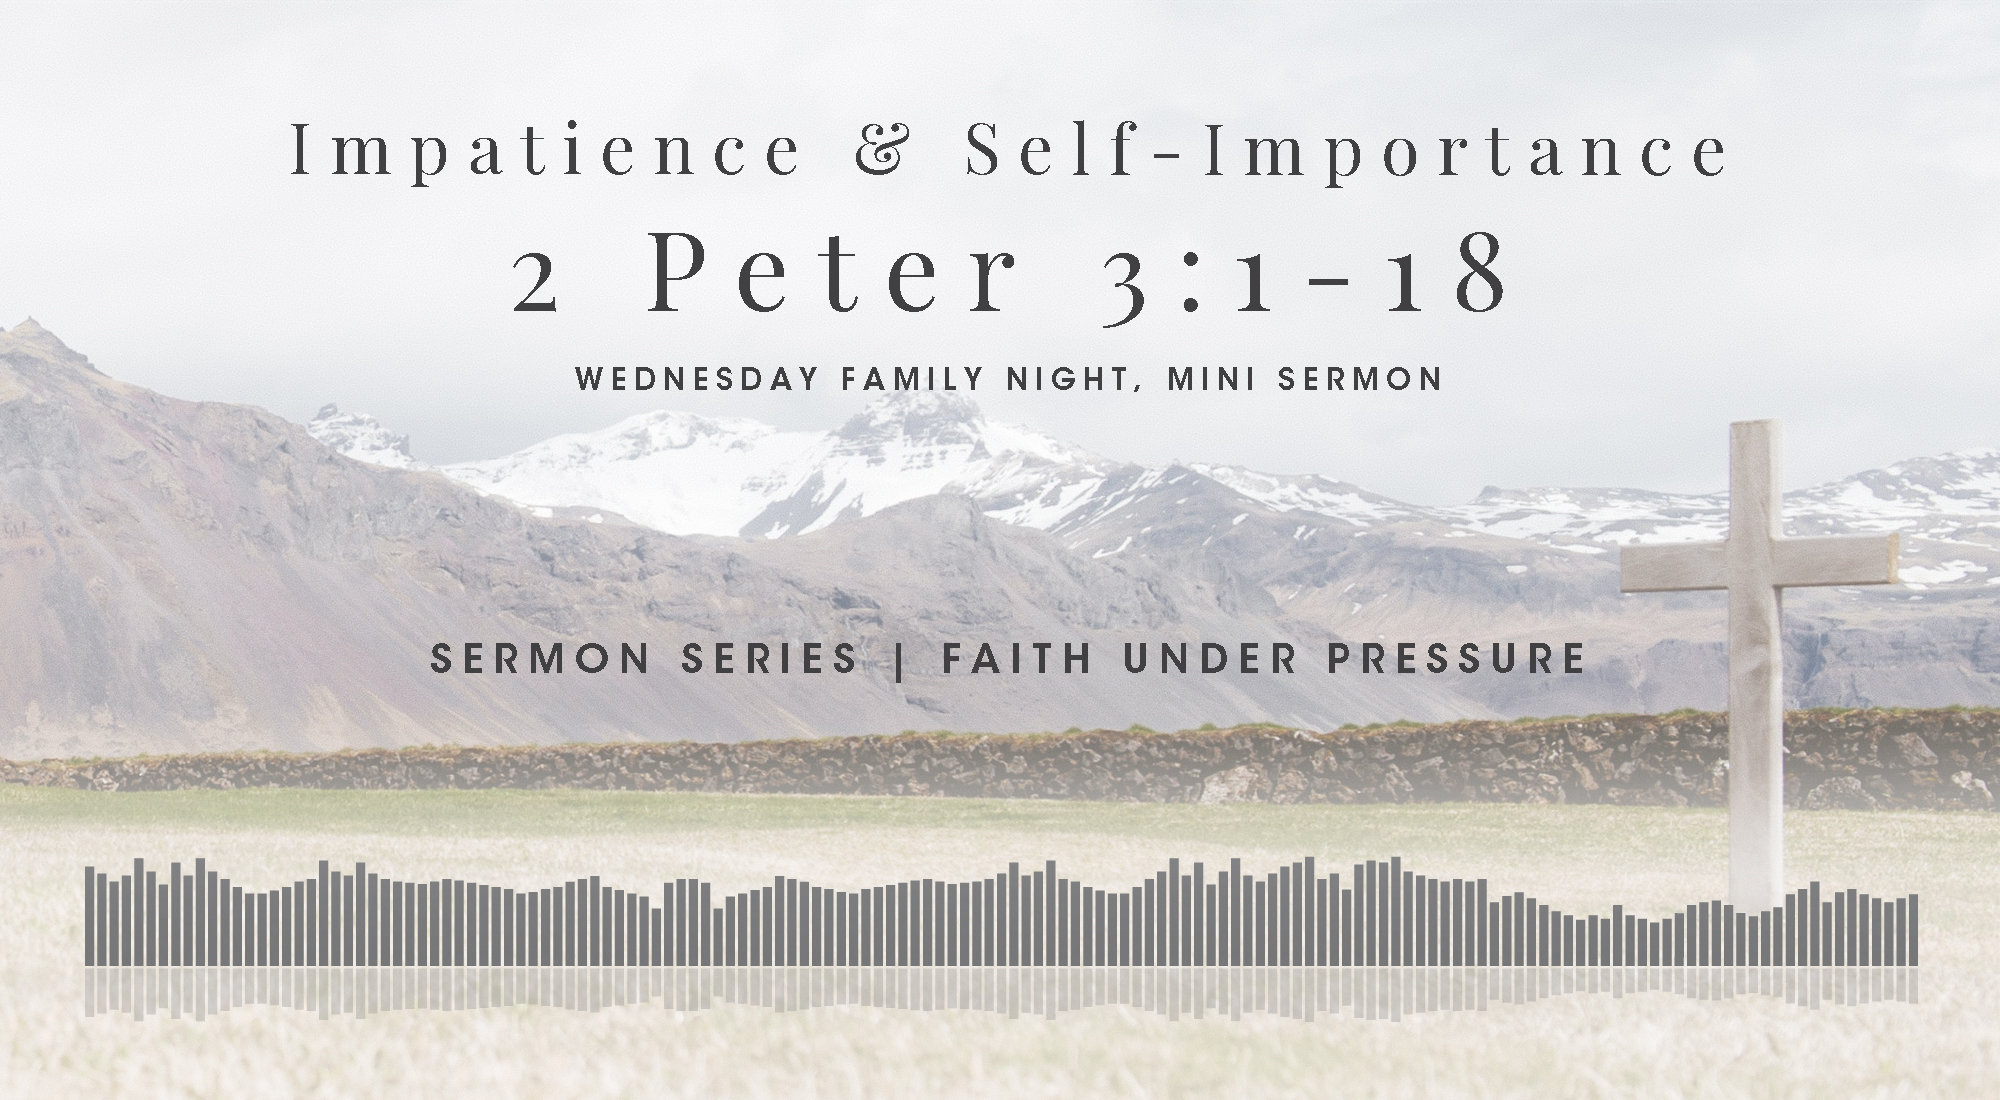 A Mini Bible Study in 2 Peter 3:1-18, From Our Faith Under Pressure Sermon Series, Wyandotte County Christian Church Wednesday Family Night